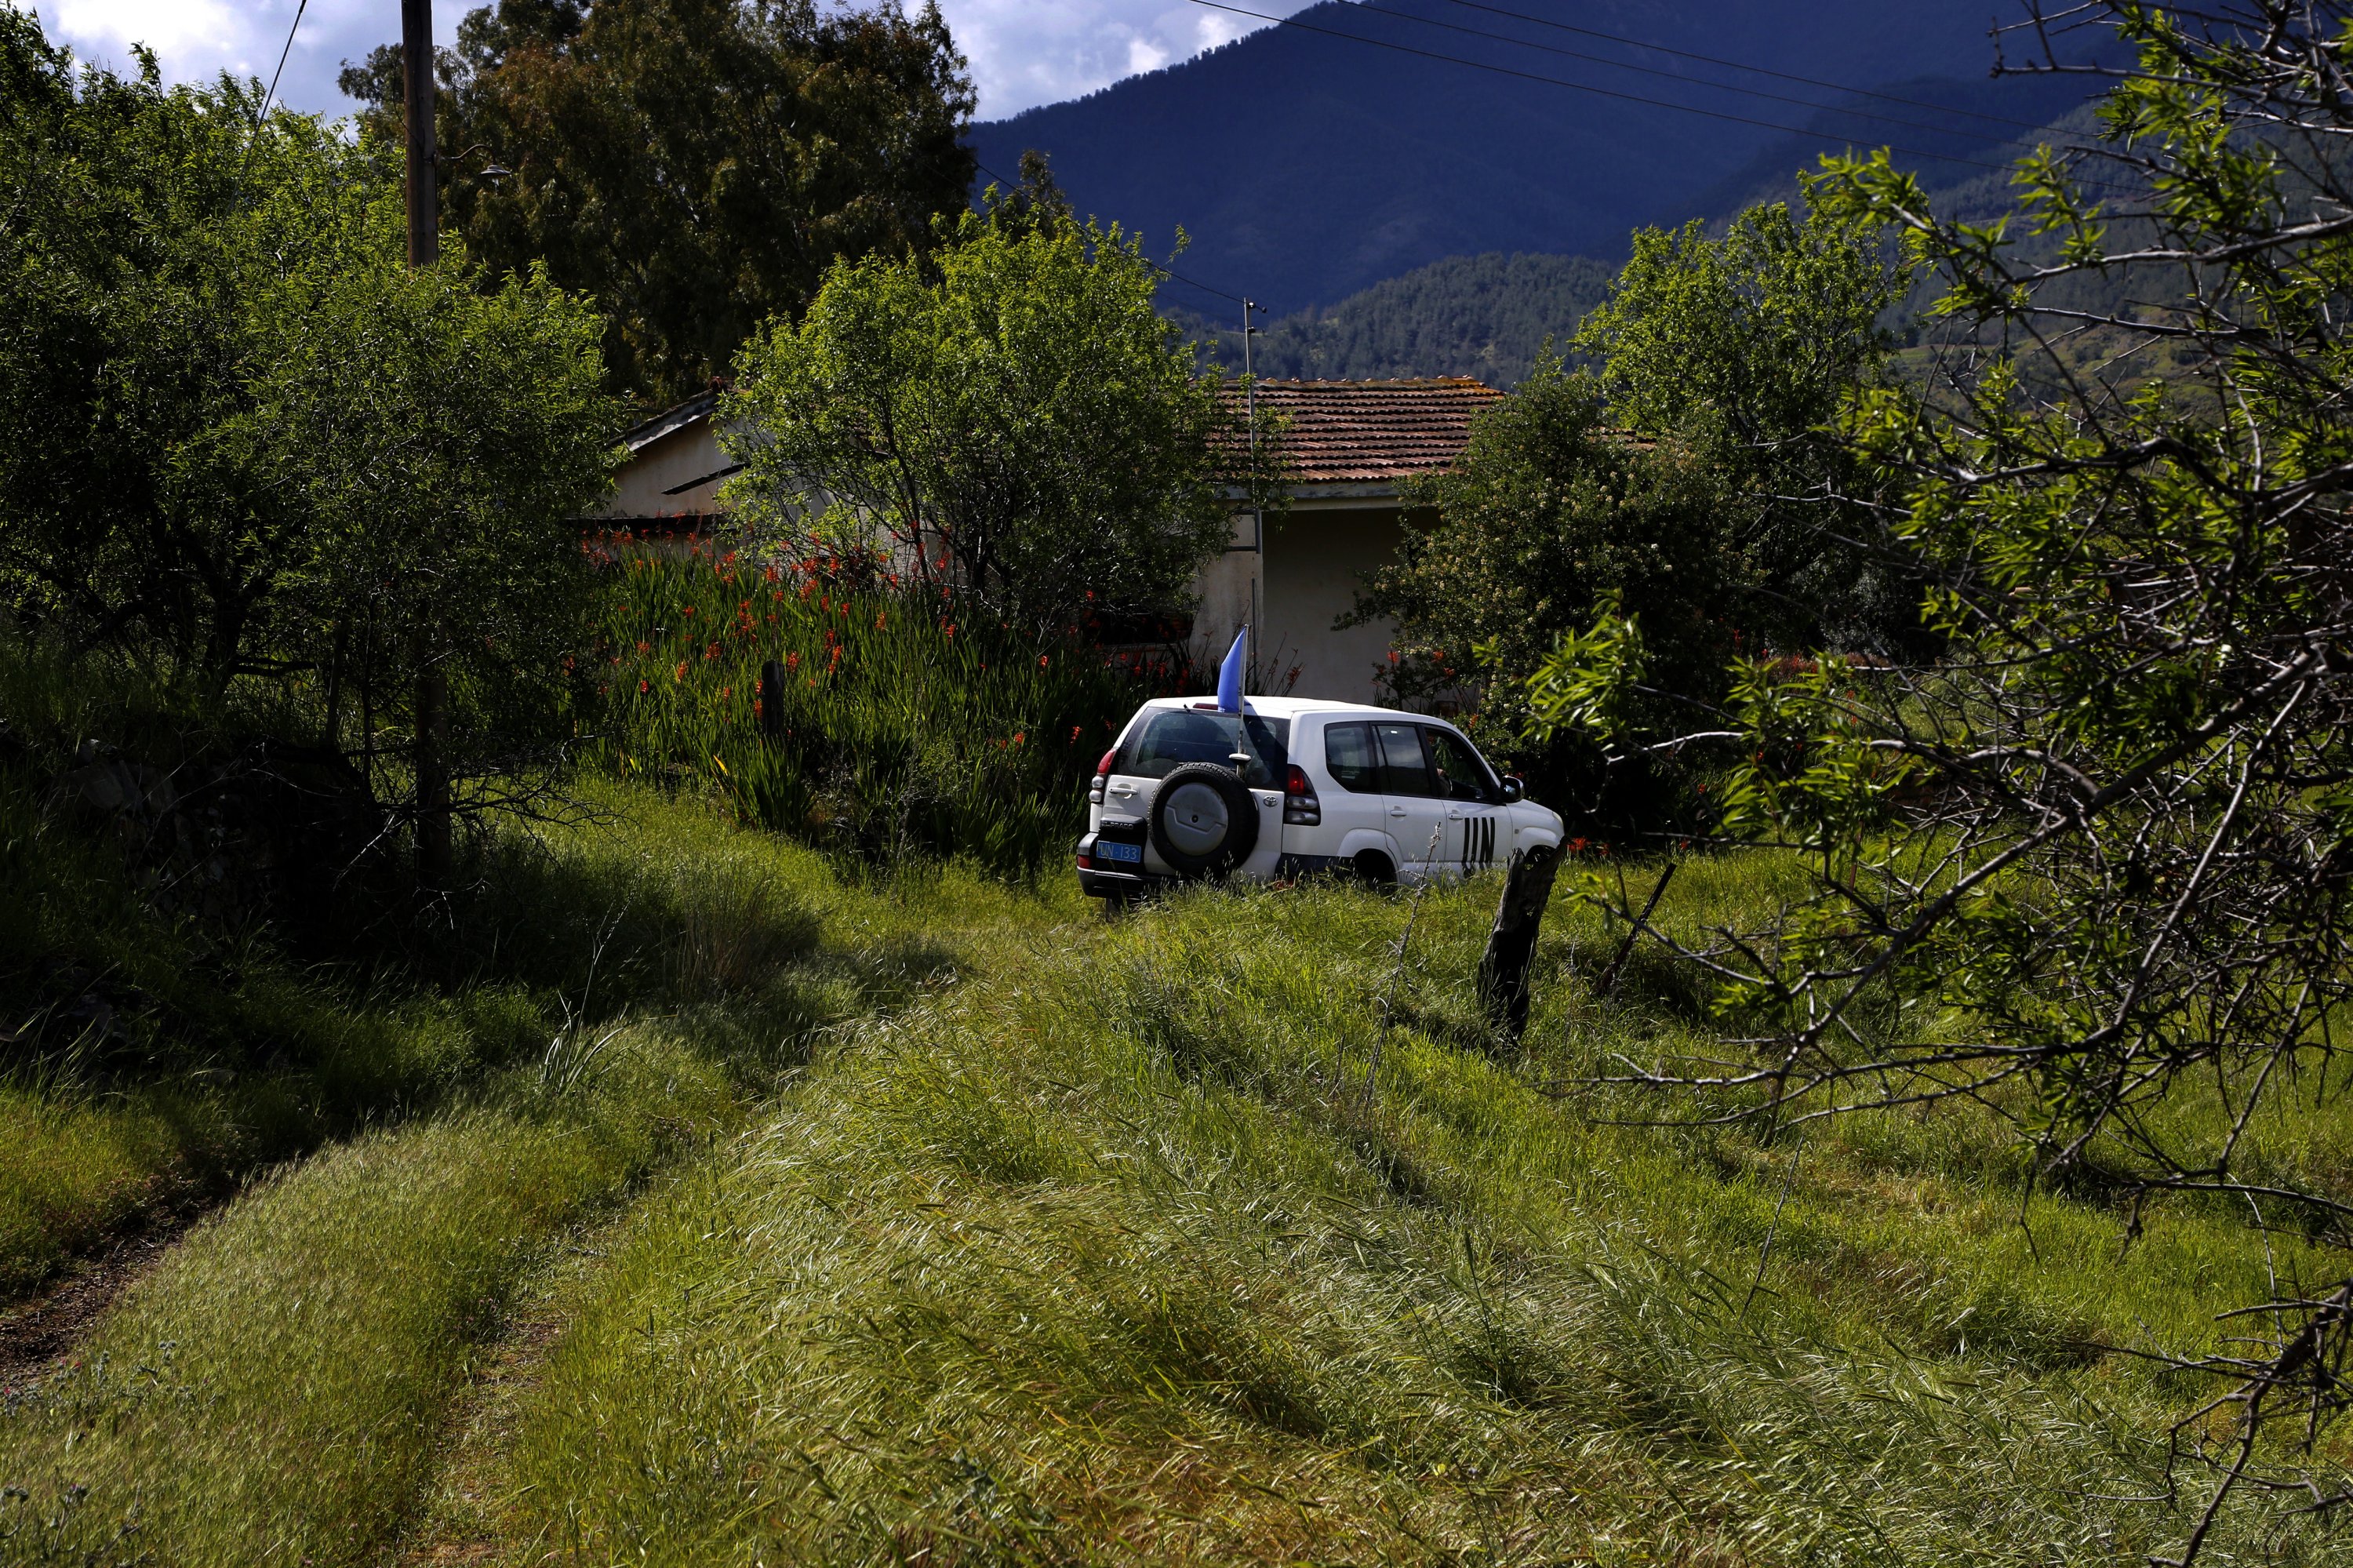 A U.N. vehicle drives through the abandoned village of Varisia inside the U.N.-controlled buffer zone that divides the Greek-controlled south and the Turkish-controlled north, on the island of Cyprus, March 26, 2021. (AP Photo)